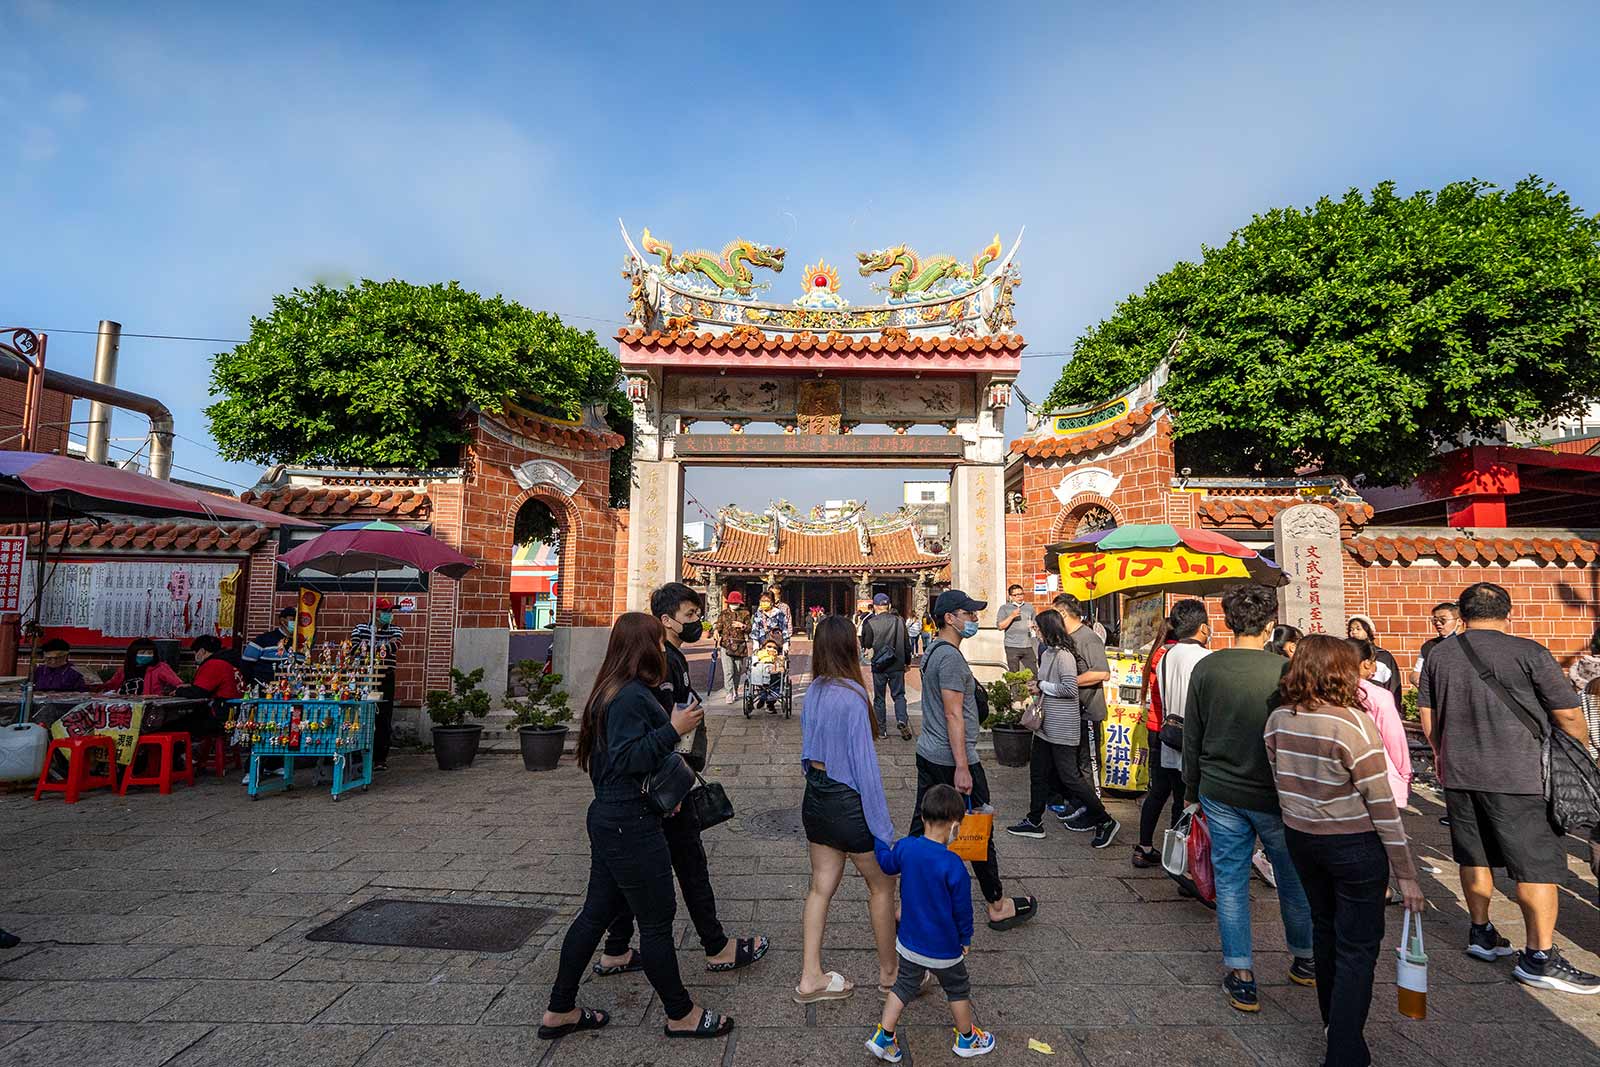 Pedestrians walk across a tile square in front of Lukang Tianhou Temple; the temple can be seen through its gate.